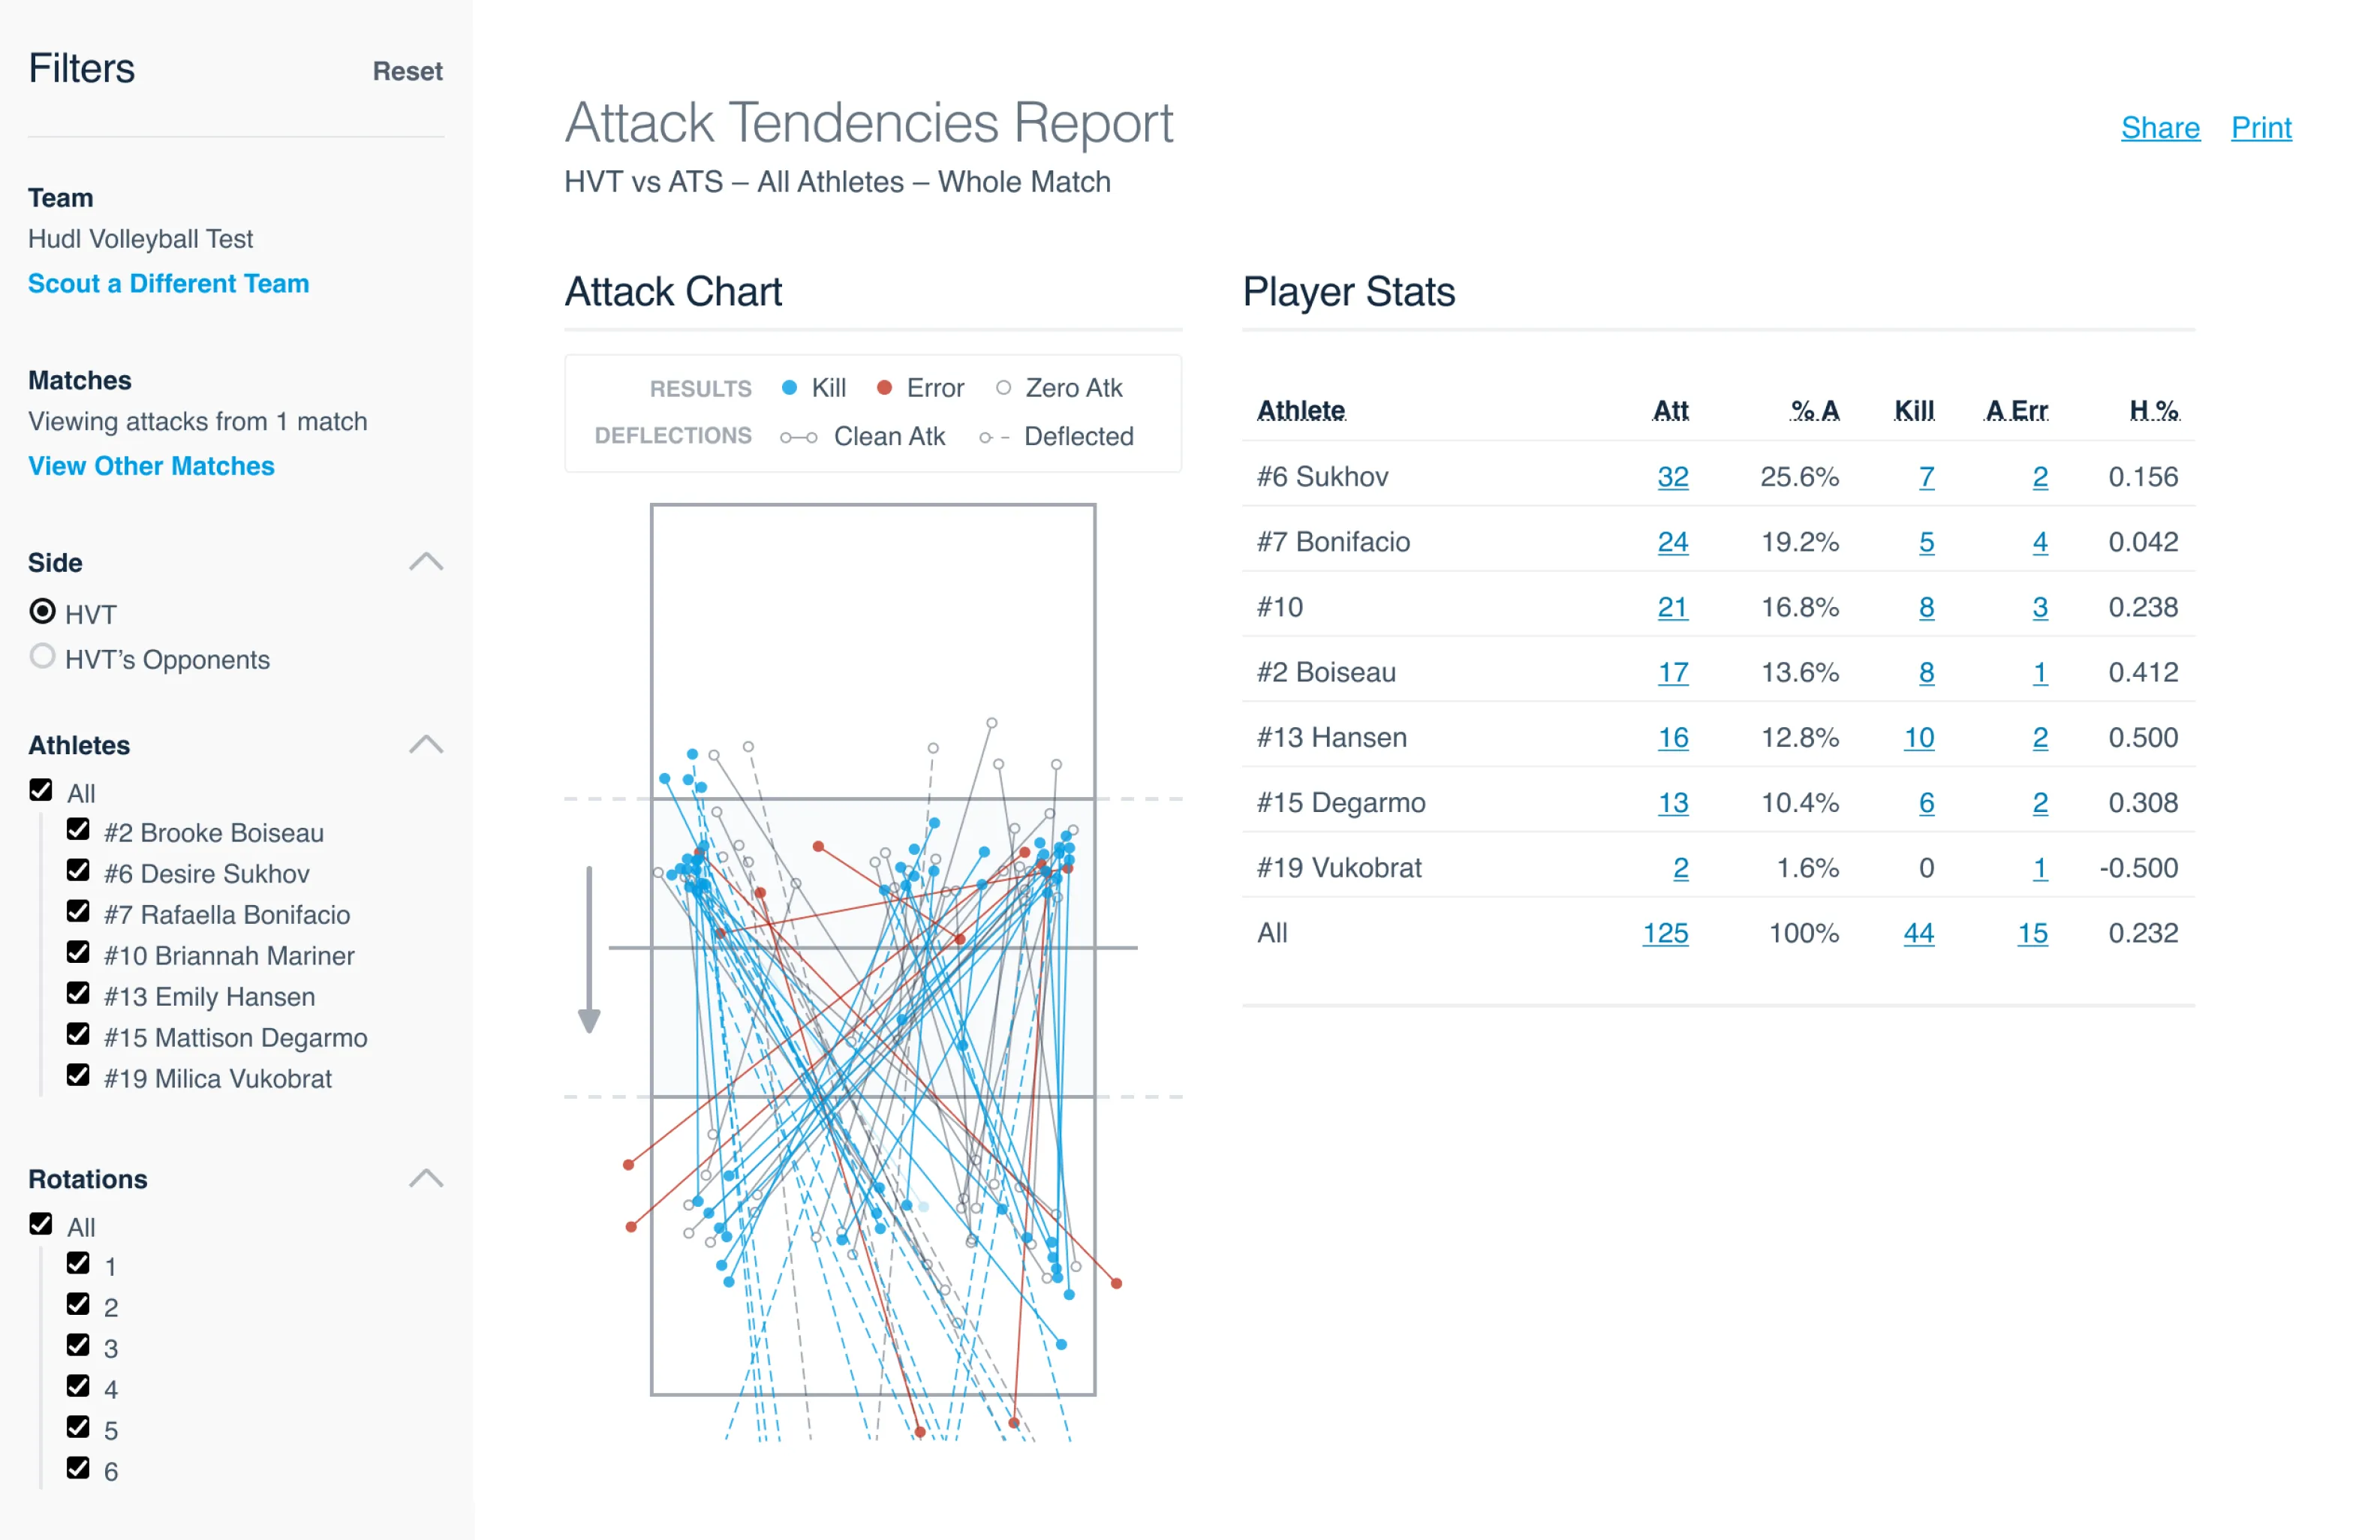 A report showing the attack tendencies of a team, with a visualization and a table of the data.